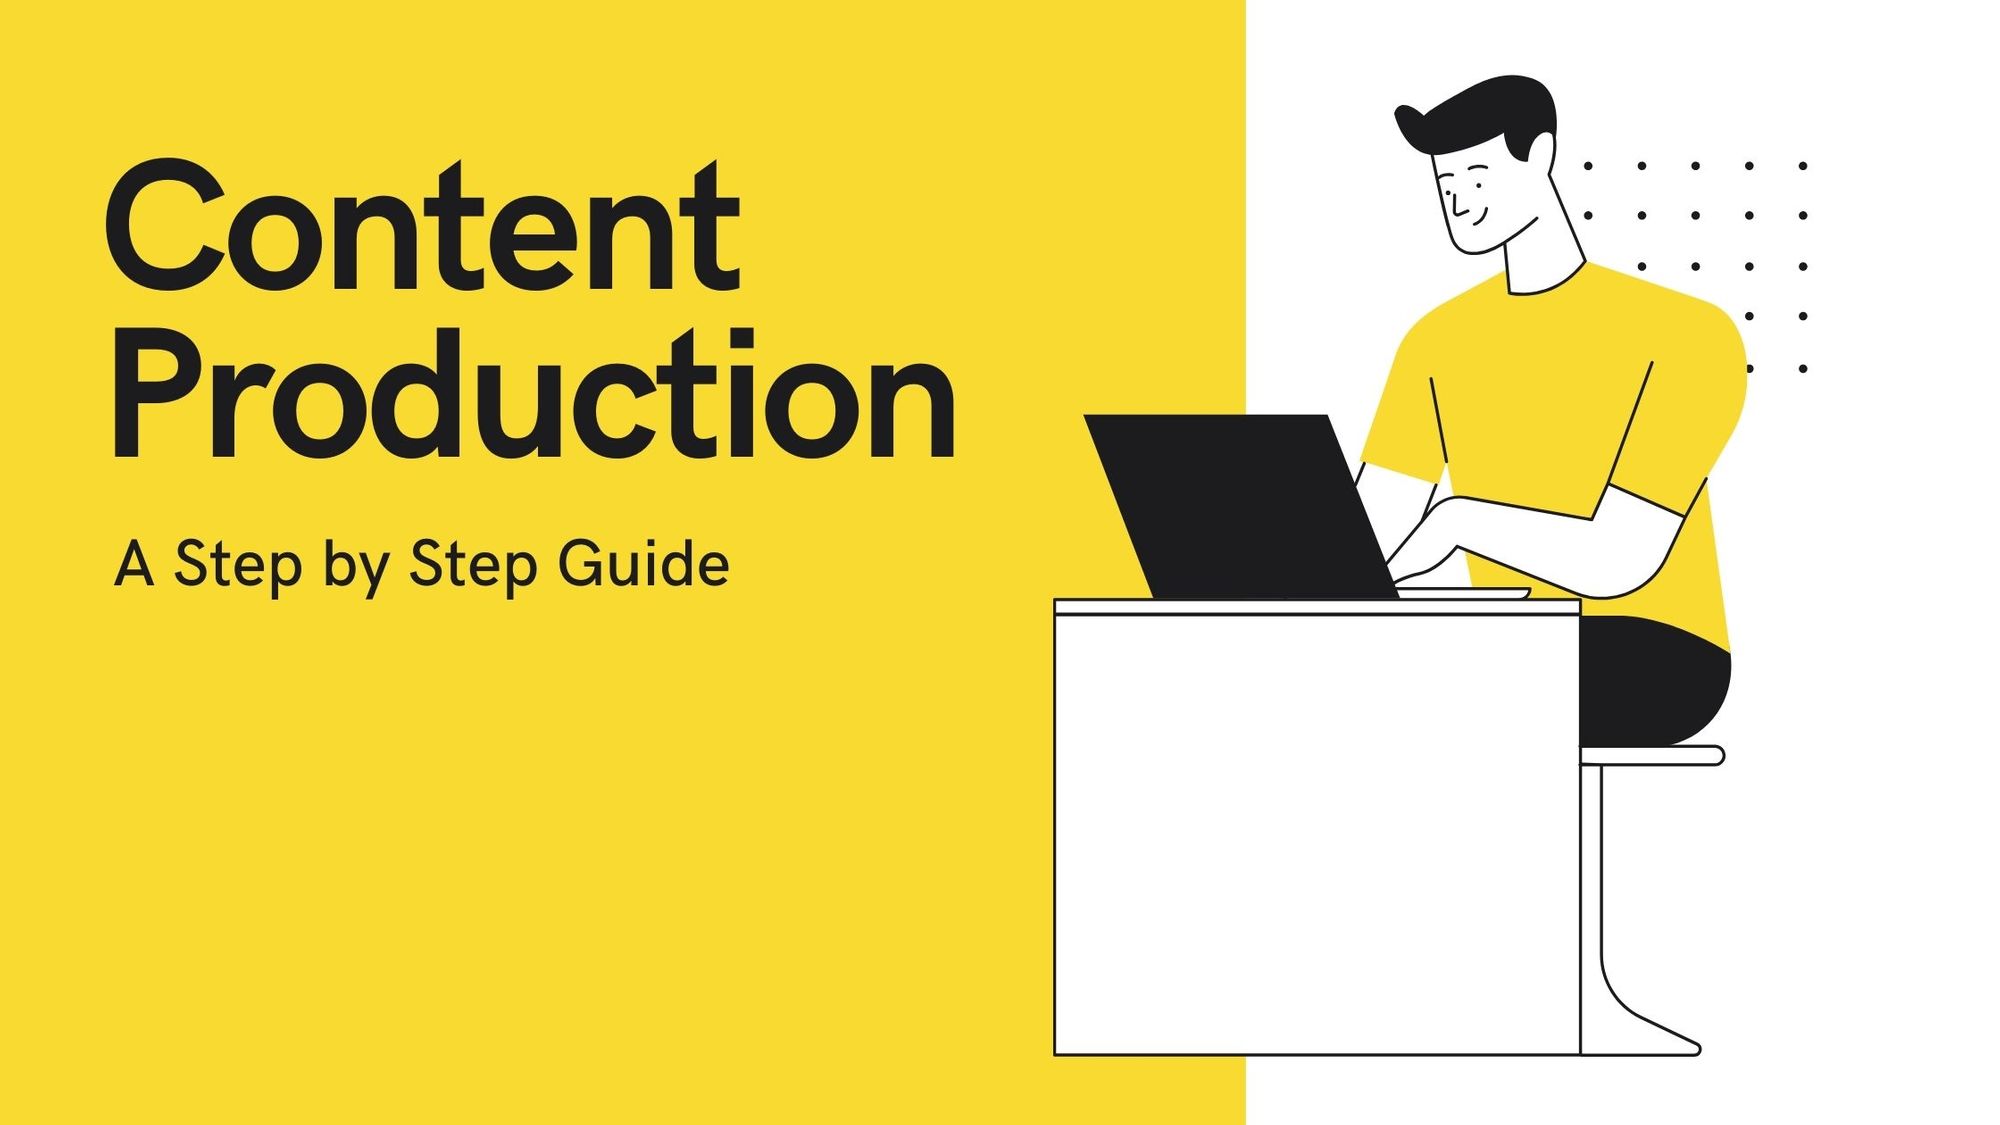 How To Guide Your Content Production With Remote Teamwork